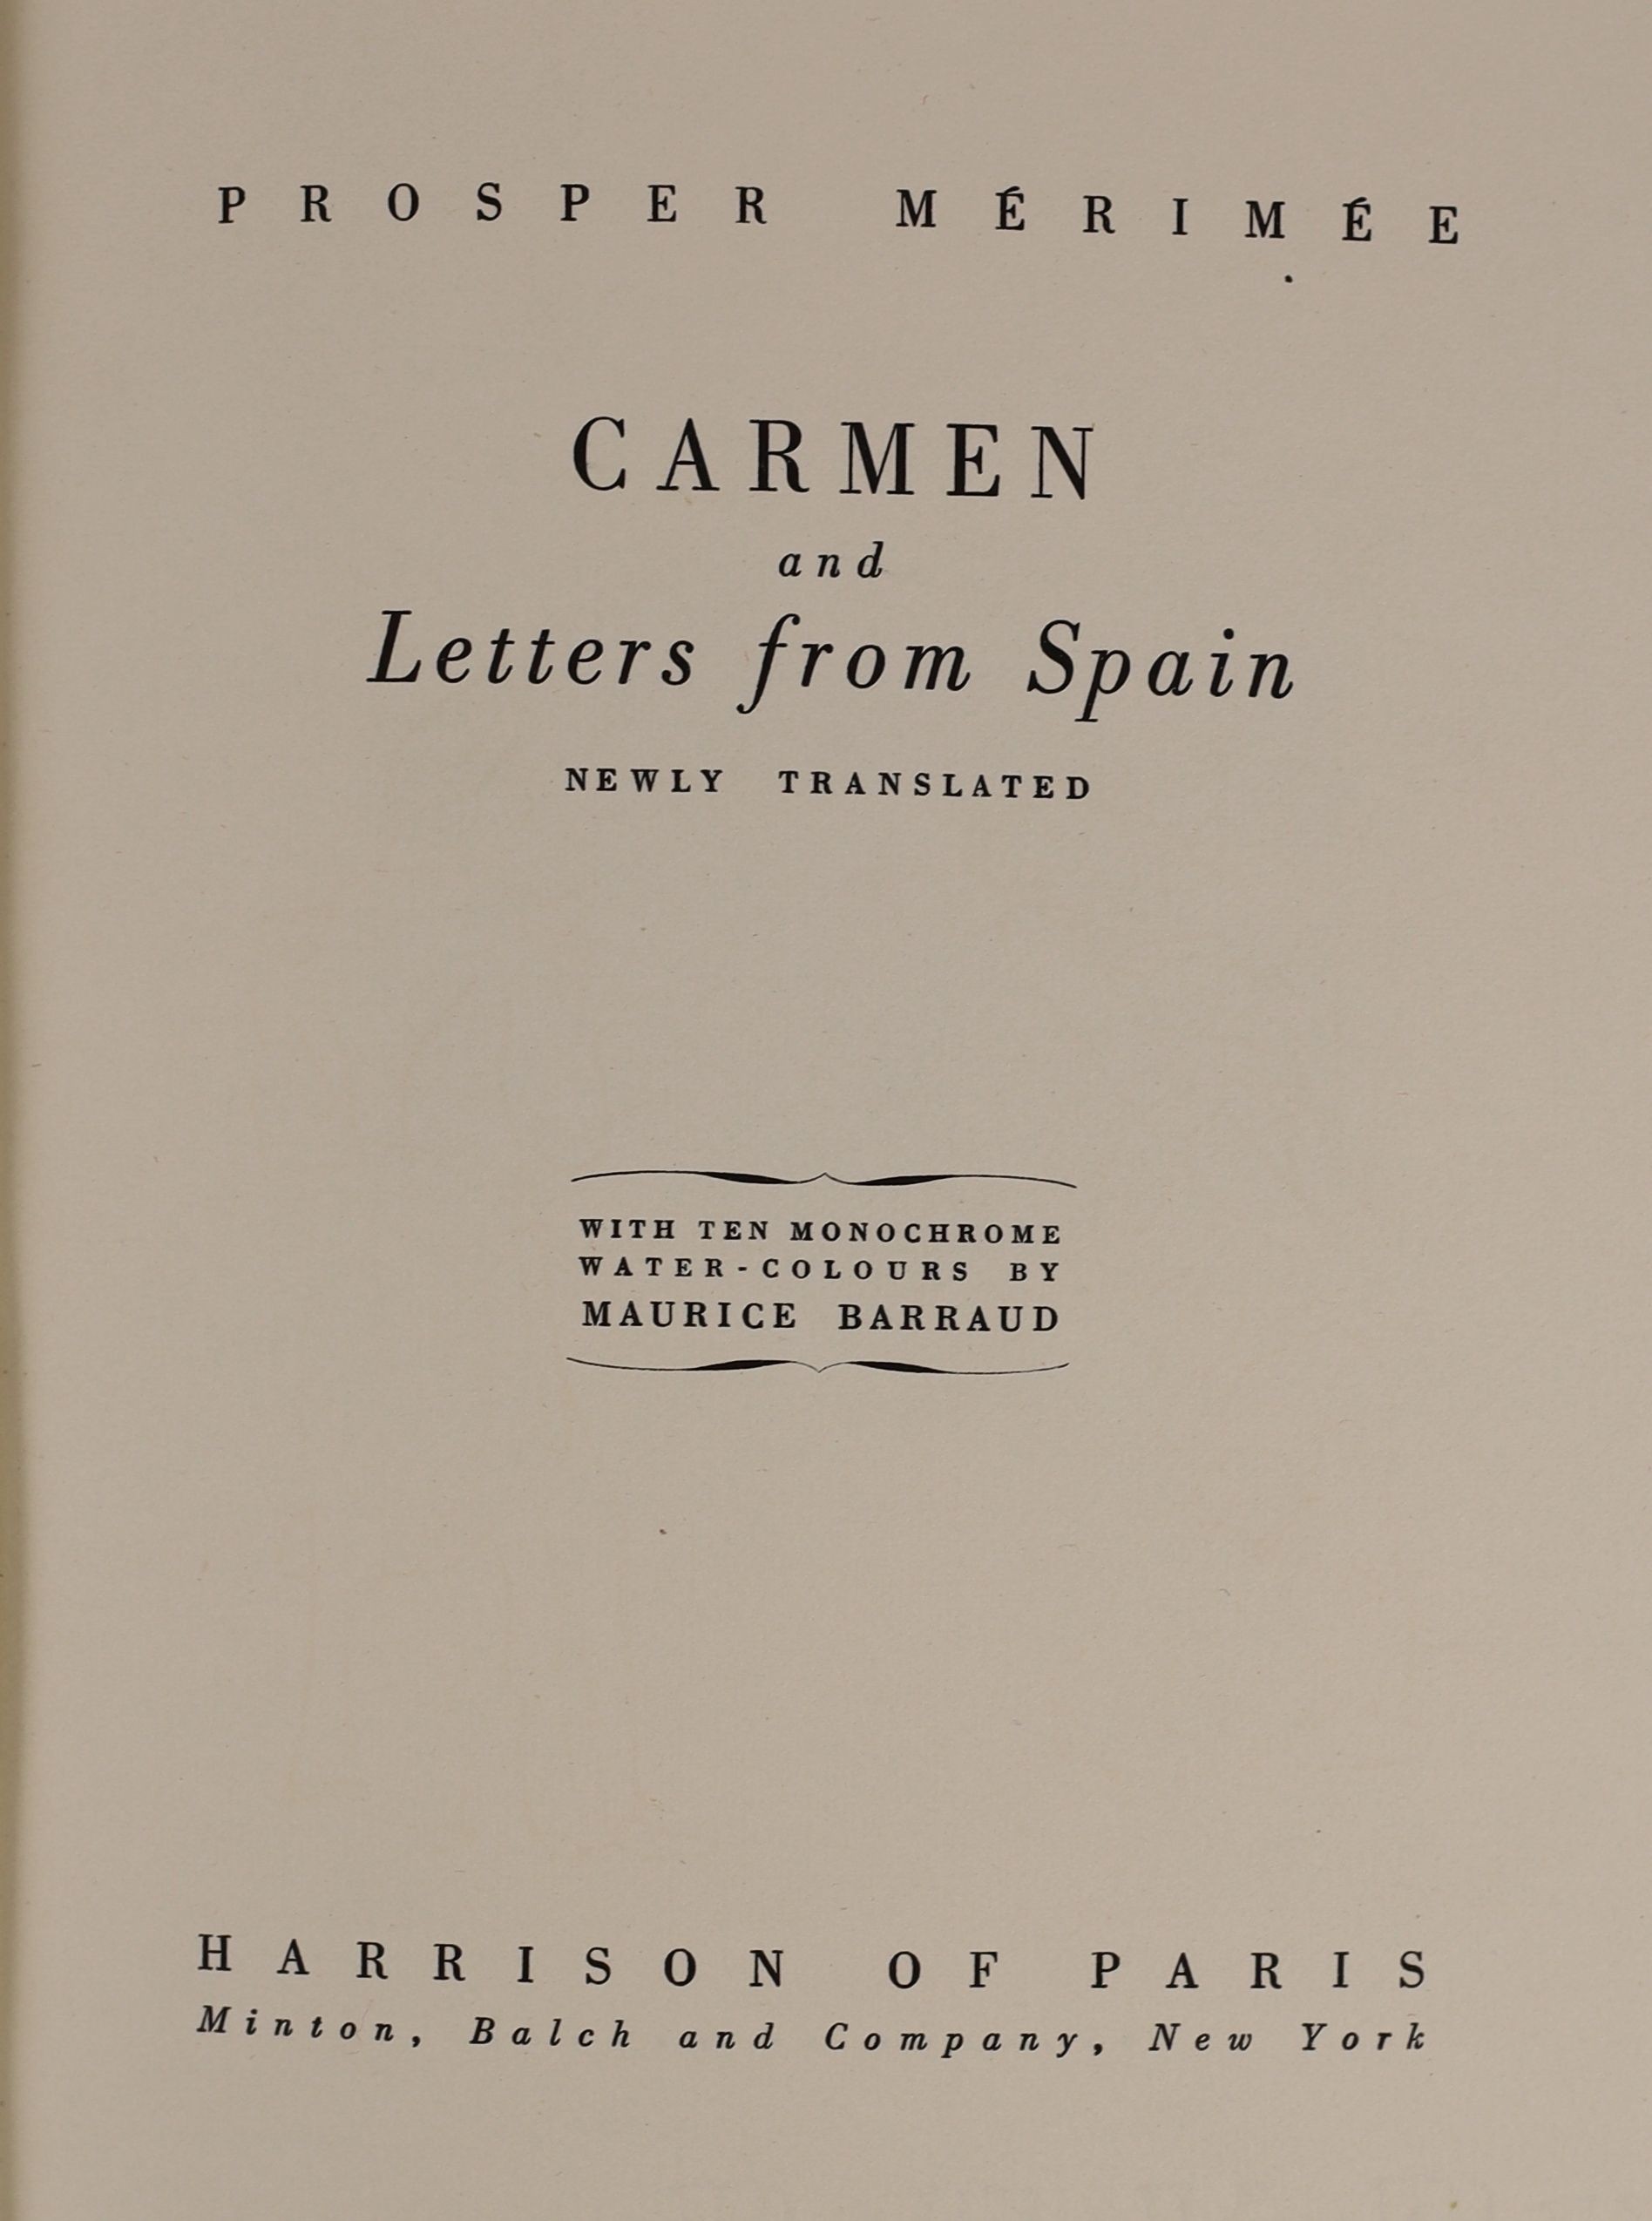 Merimée, Prosper - Carmen and Letters from Spain. Limited edition, one of 595. Complete with 10 monochrome water colour illustrations by Maurice Barraud, many of which are full page. Original pictorial board with gilt le